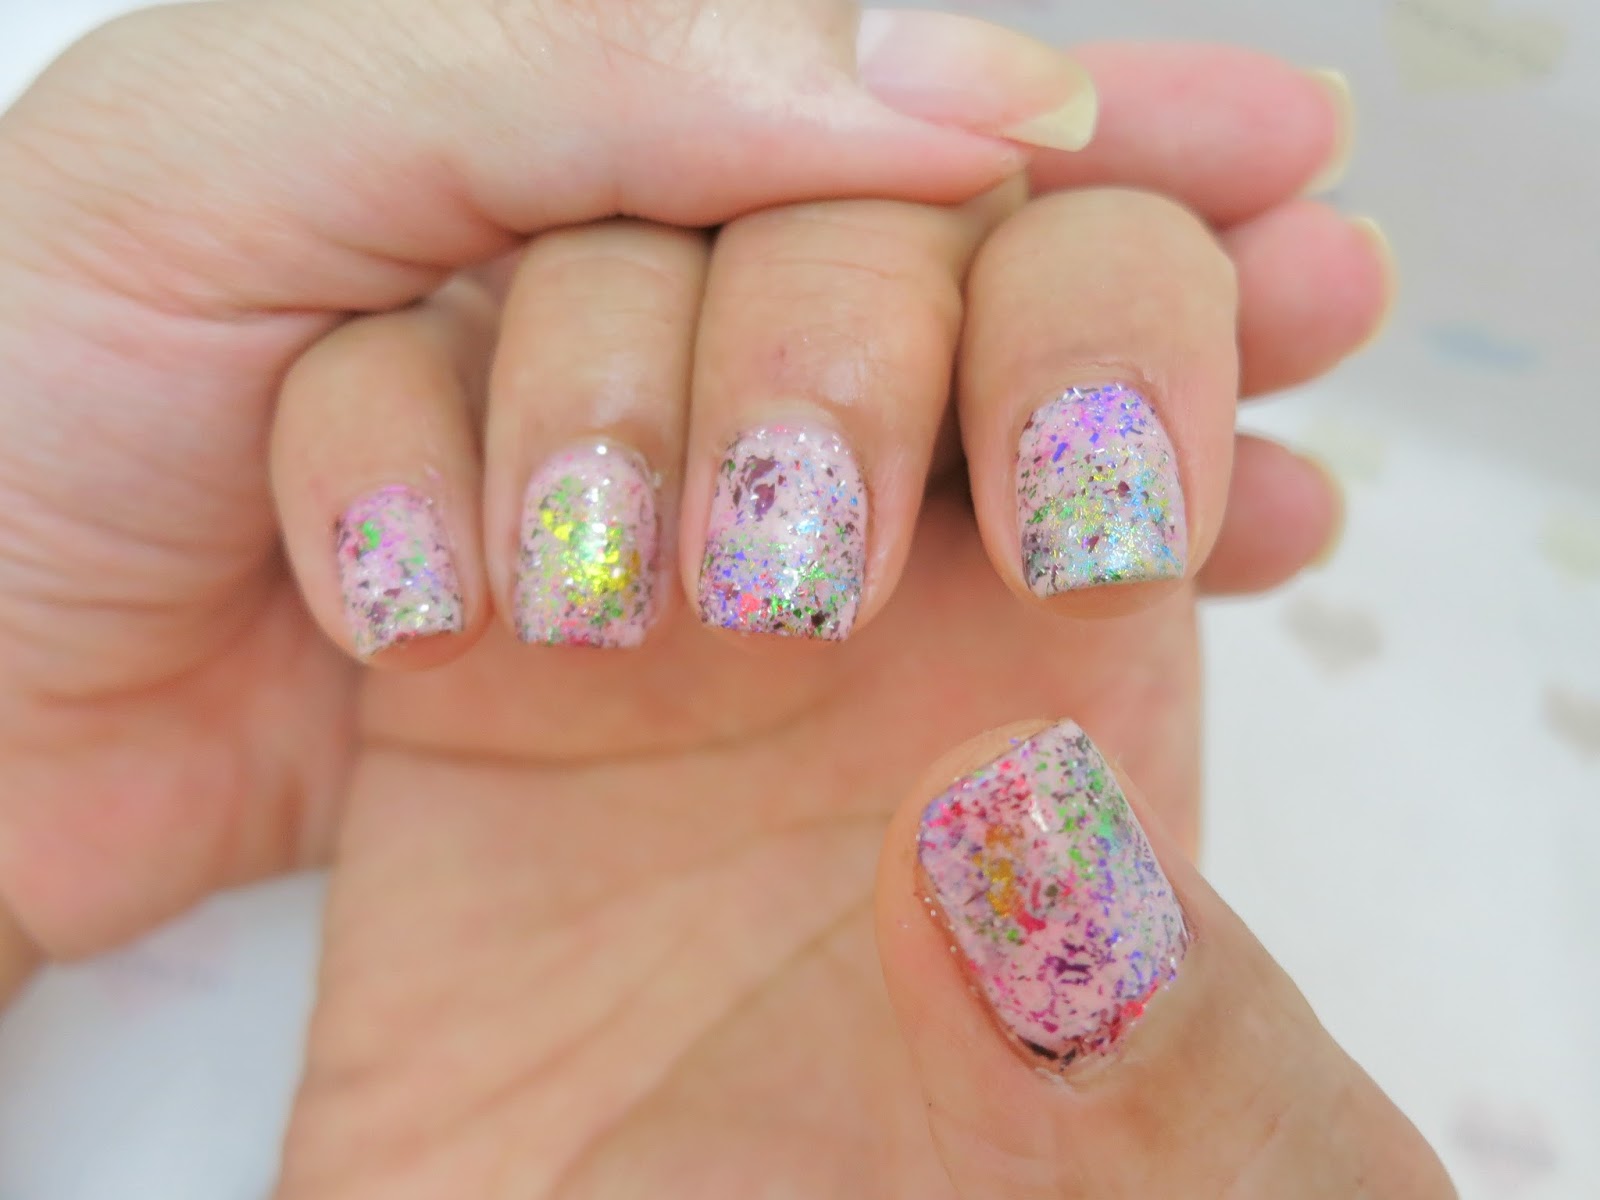 5. Nail Foil vs. Nail Stickers: Which is Better for Nail Art? - wide 7